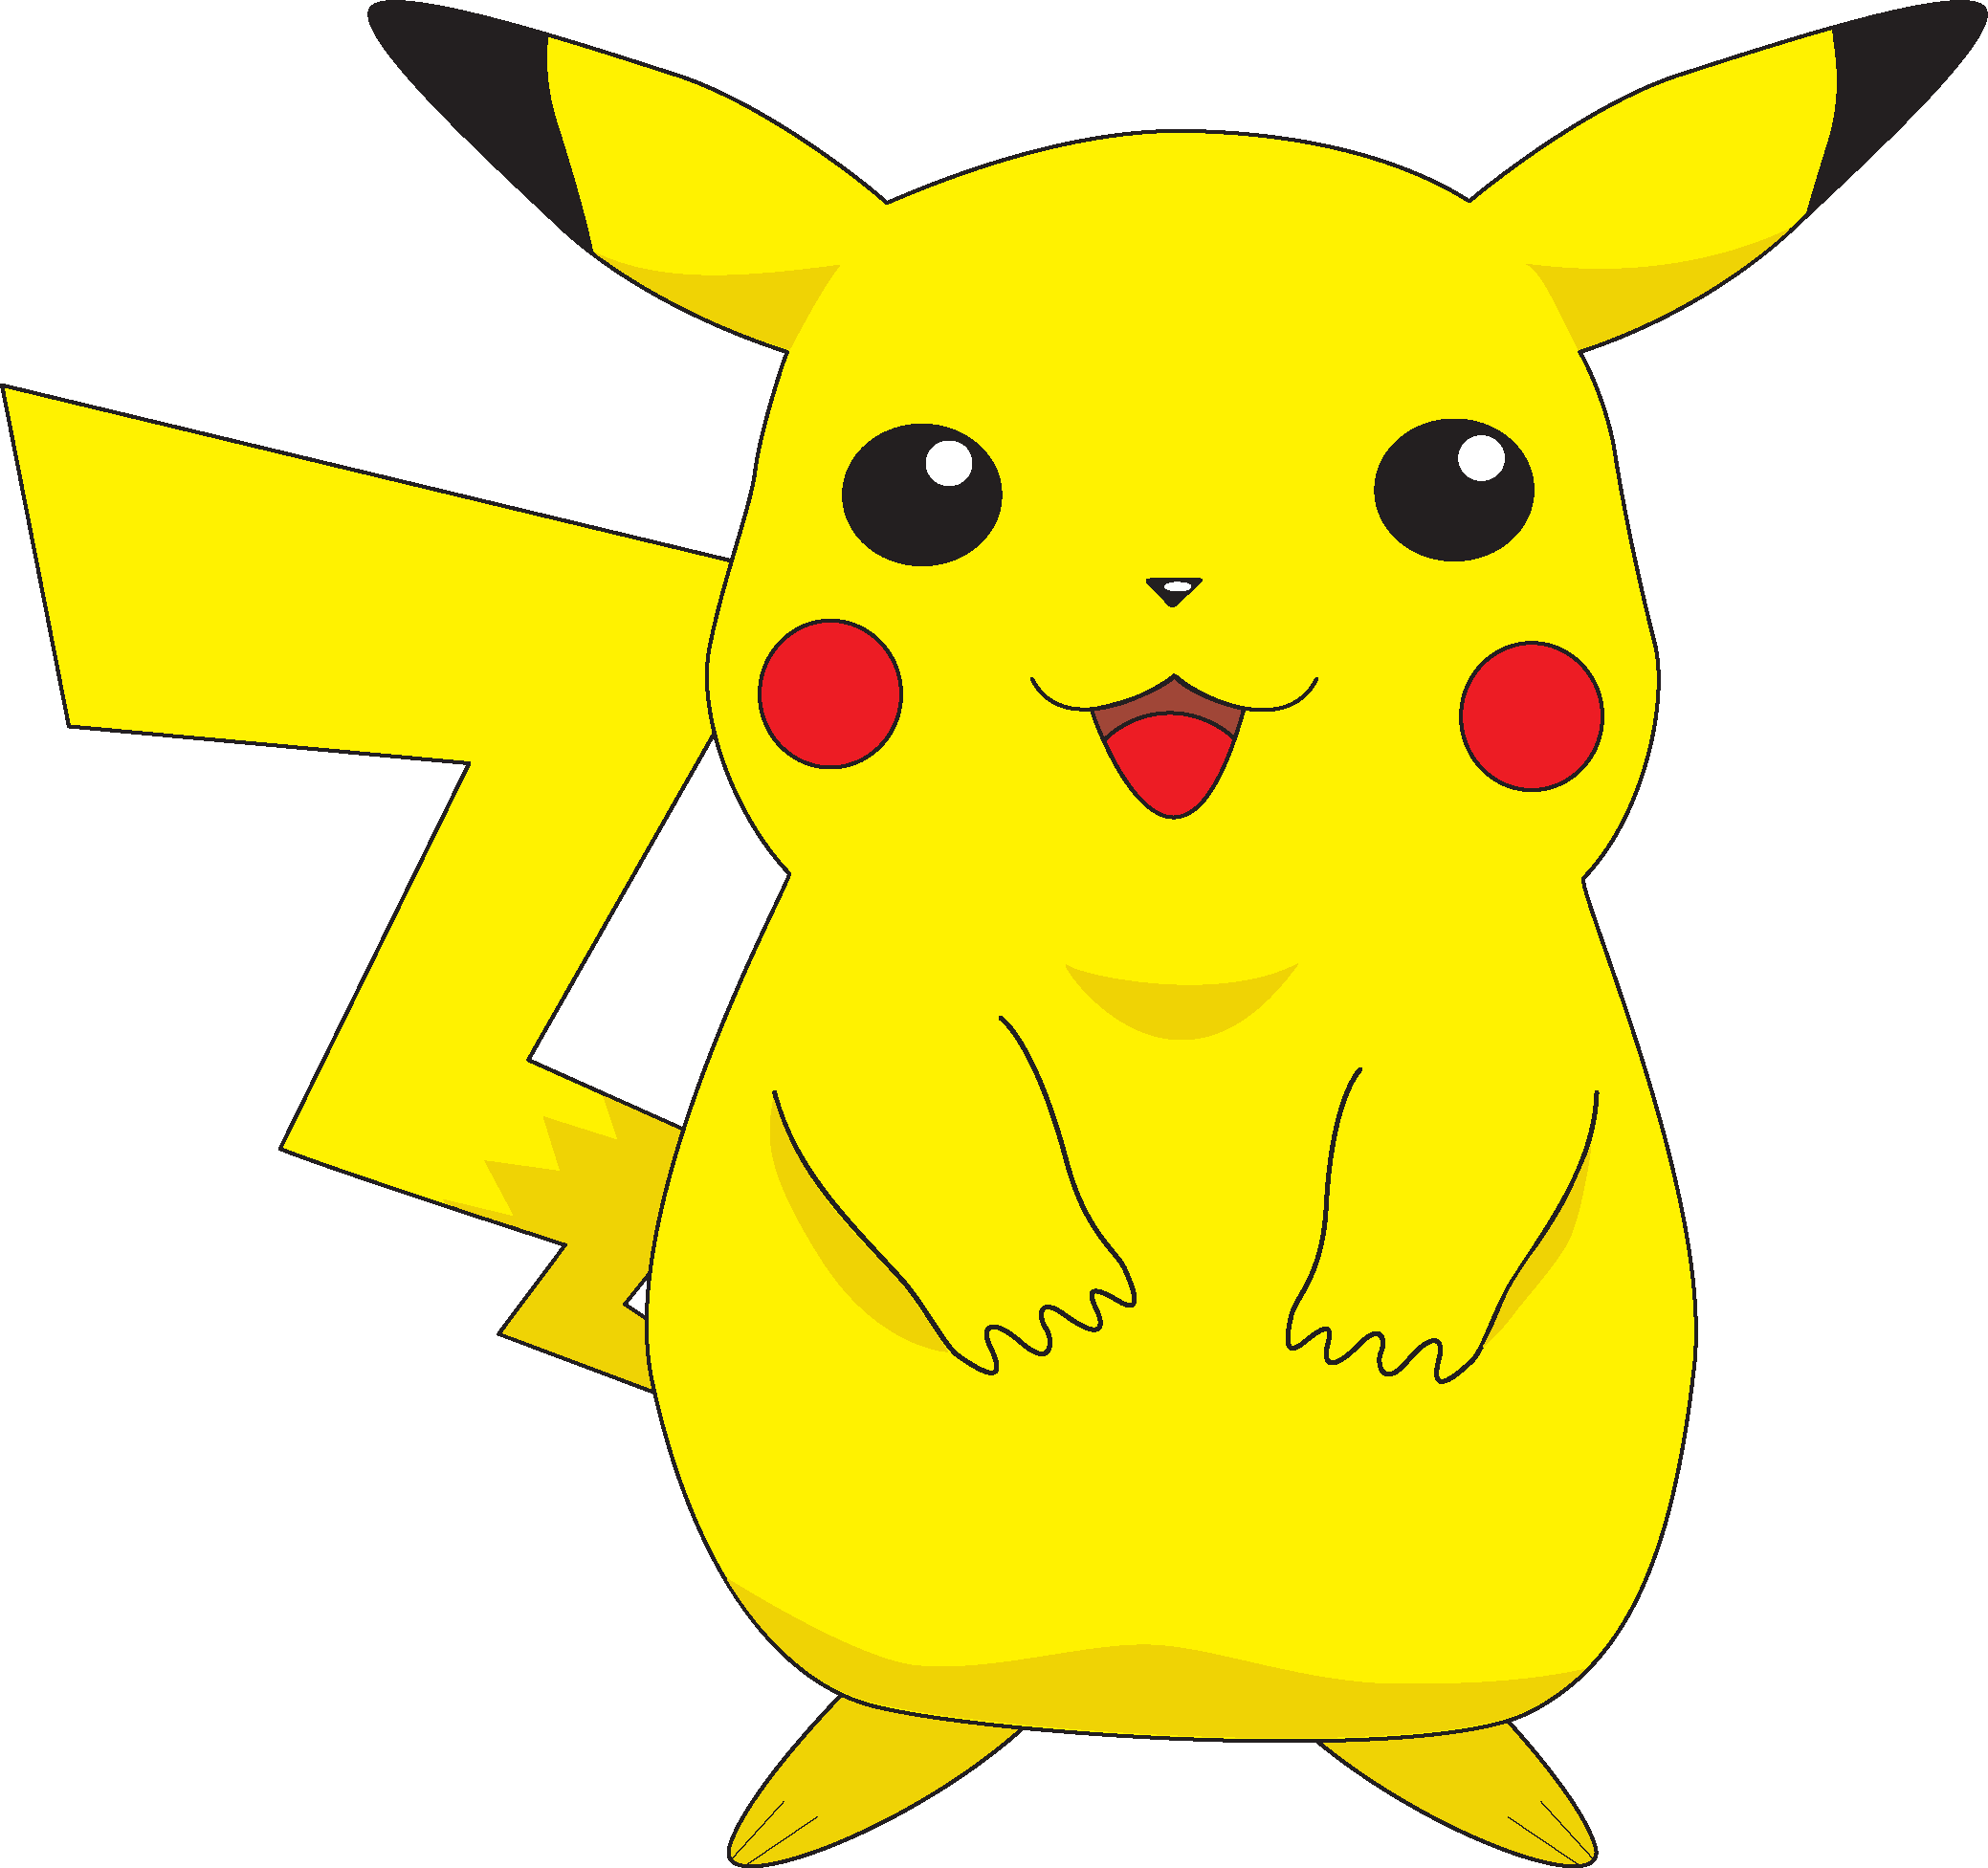 Pokemon characters vector png